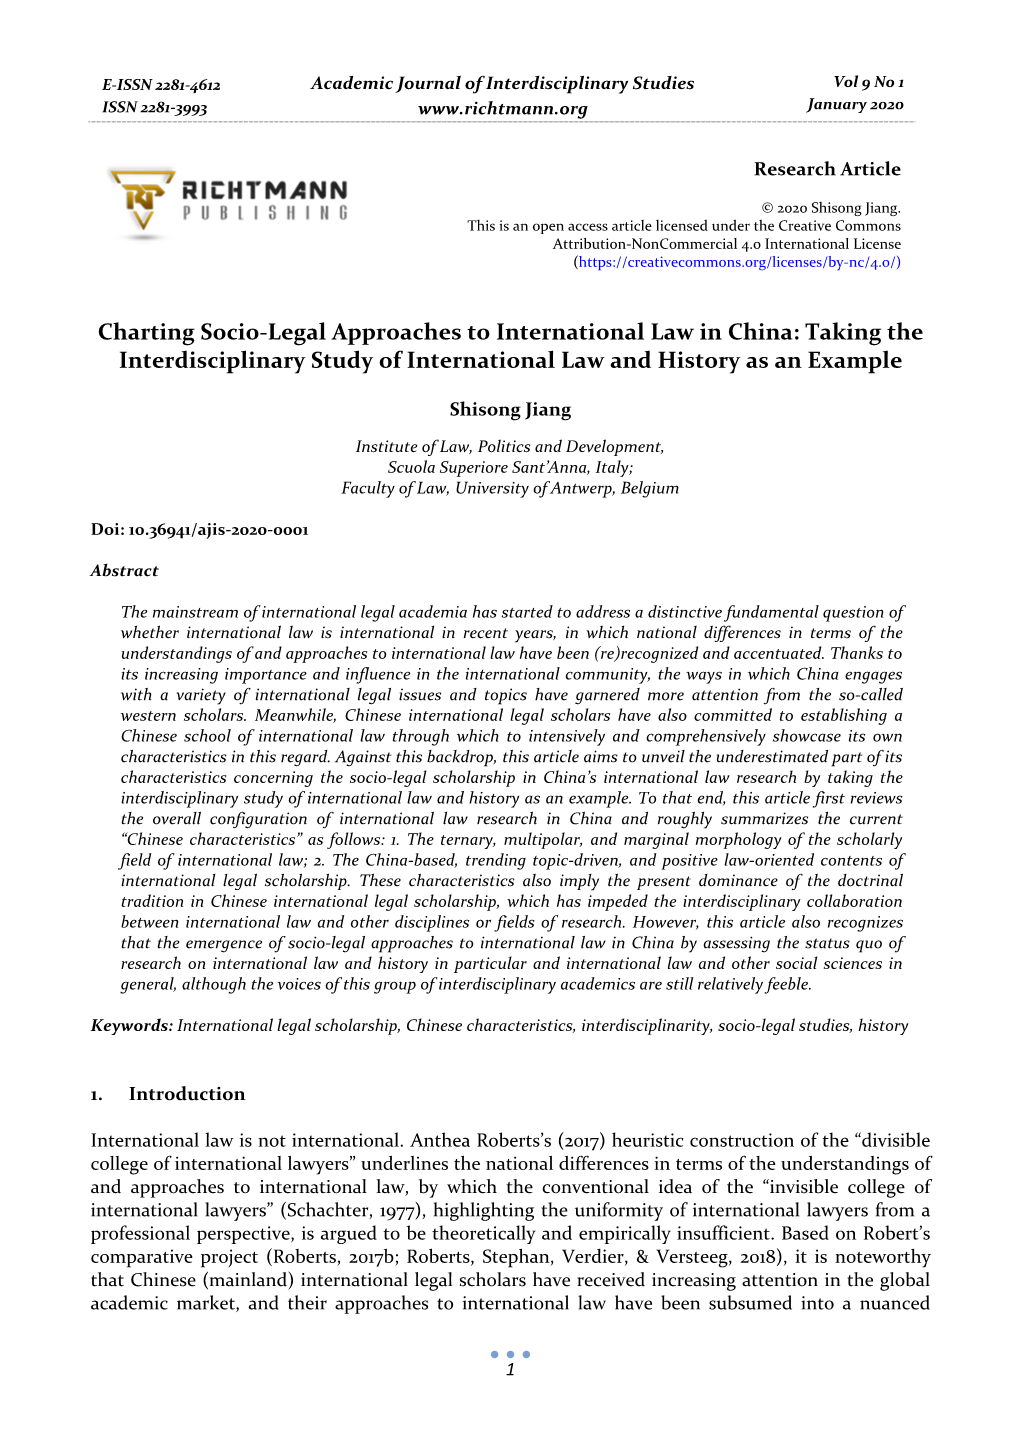 Charting Socio-Legal Approaches to International Law in China: Taking the Interdisciplinary Study of International Law and History As an Example